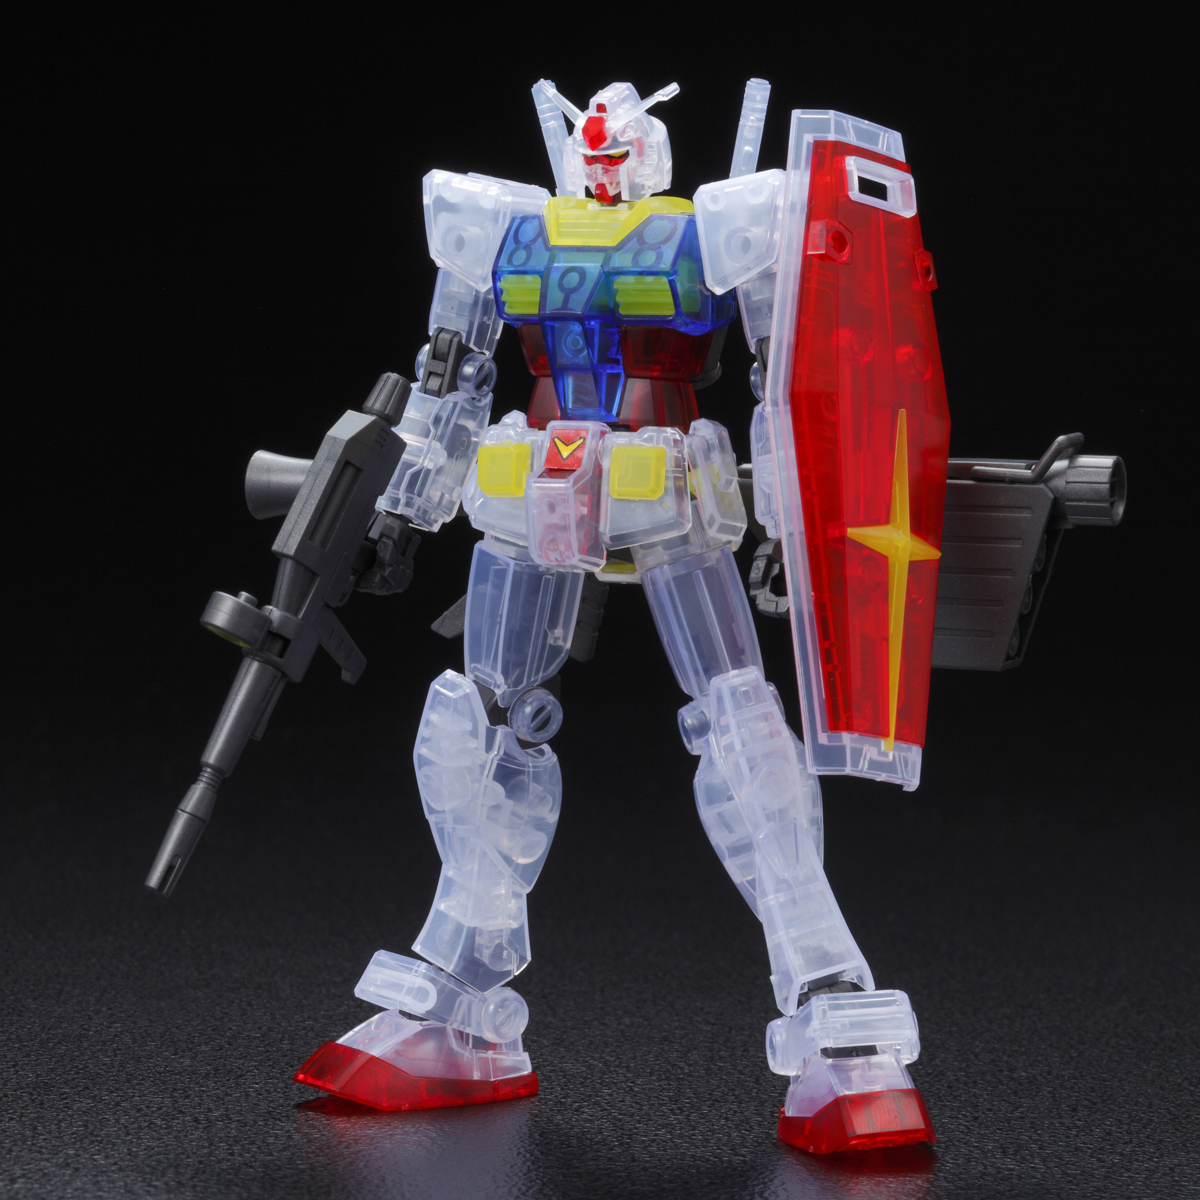 Hg 1 144 Rx 78 2 Gundam Clear Color Ver Sep Delivery Gundam Premium Bandai Usa Online Store For Action Figures Model Kits Toys And More